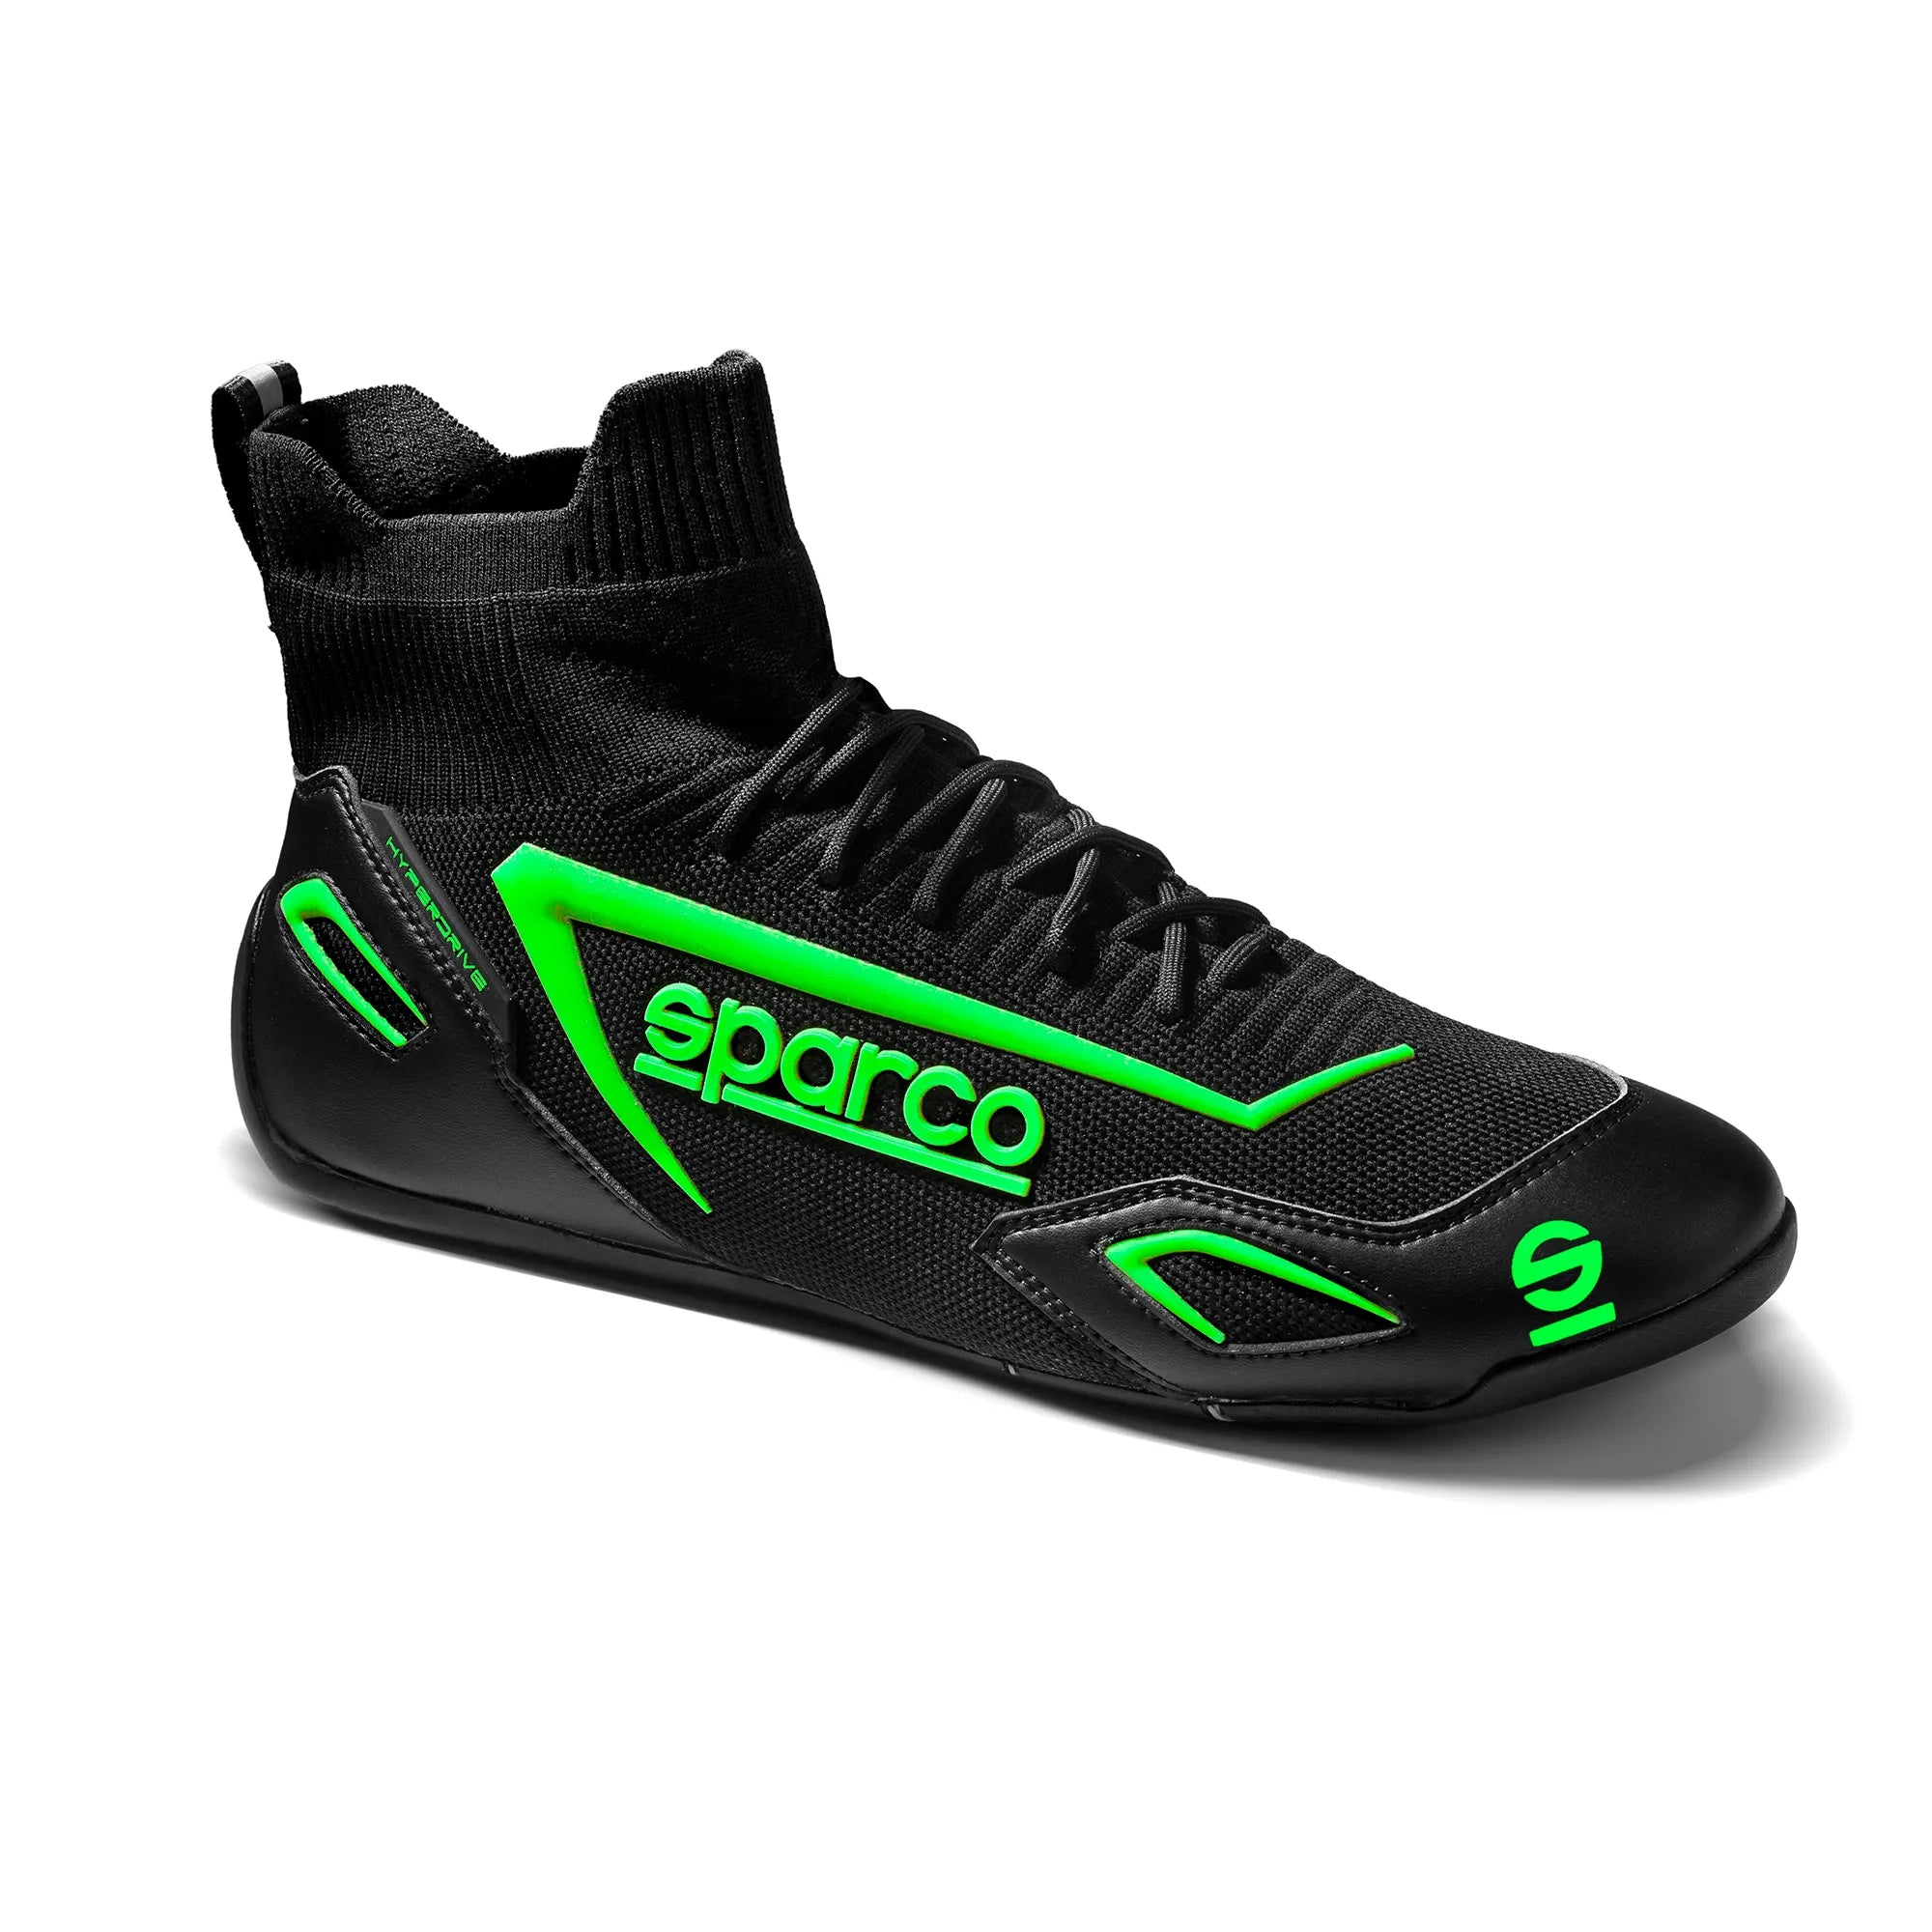 SPARCO 00129342NRVF Gaming sim racing shoes HYPERDRIVE, black/green, size 42 Photo-1 